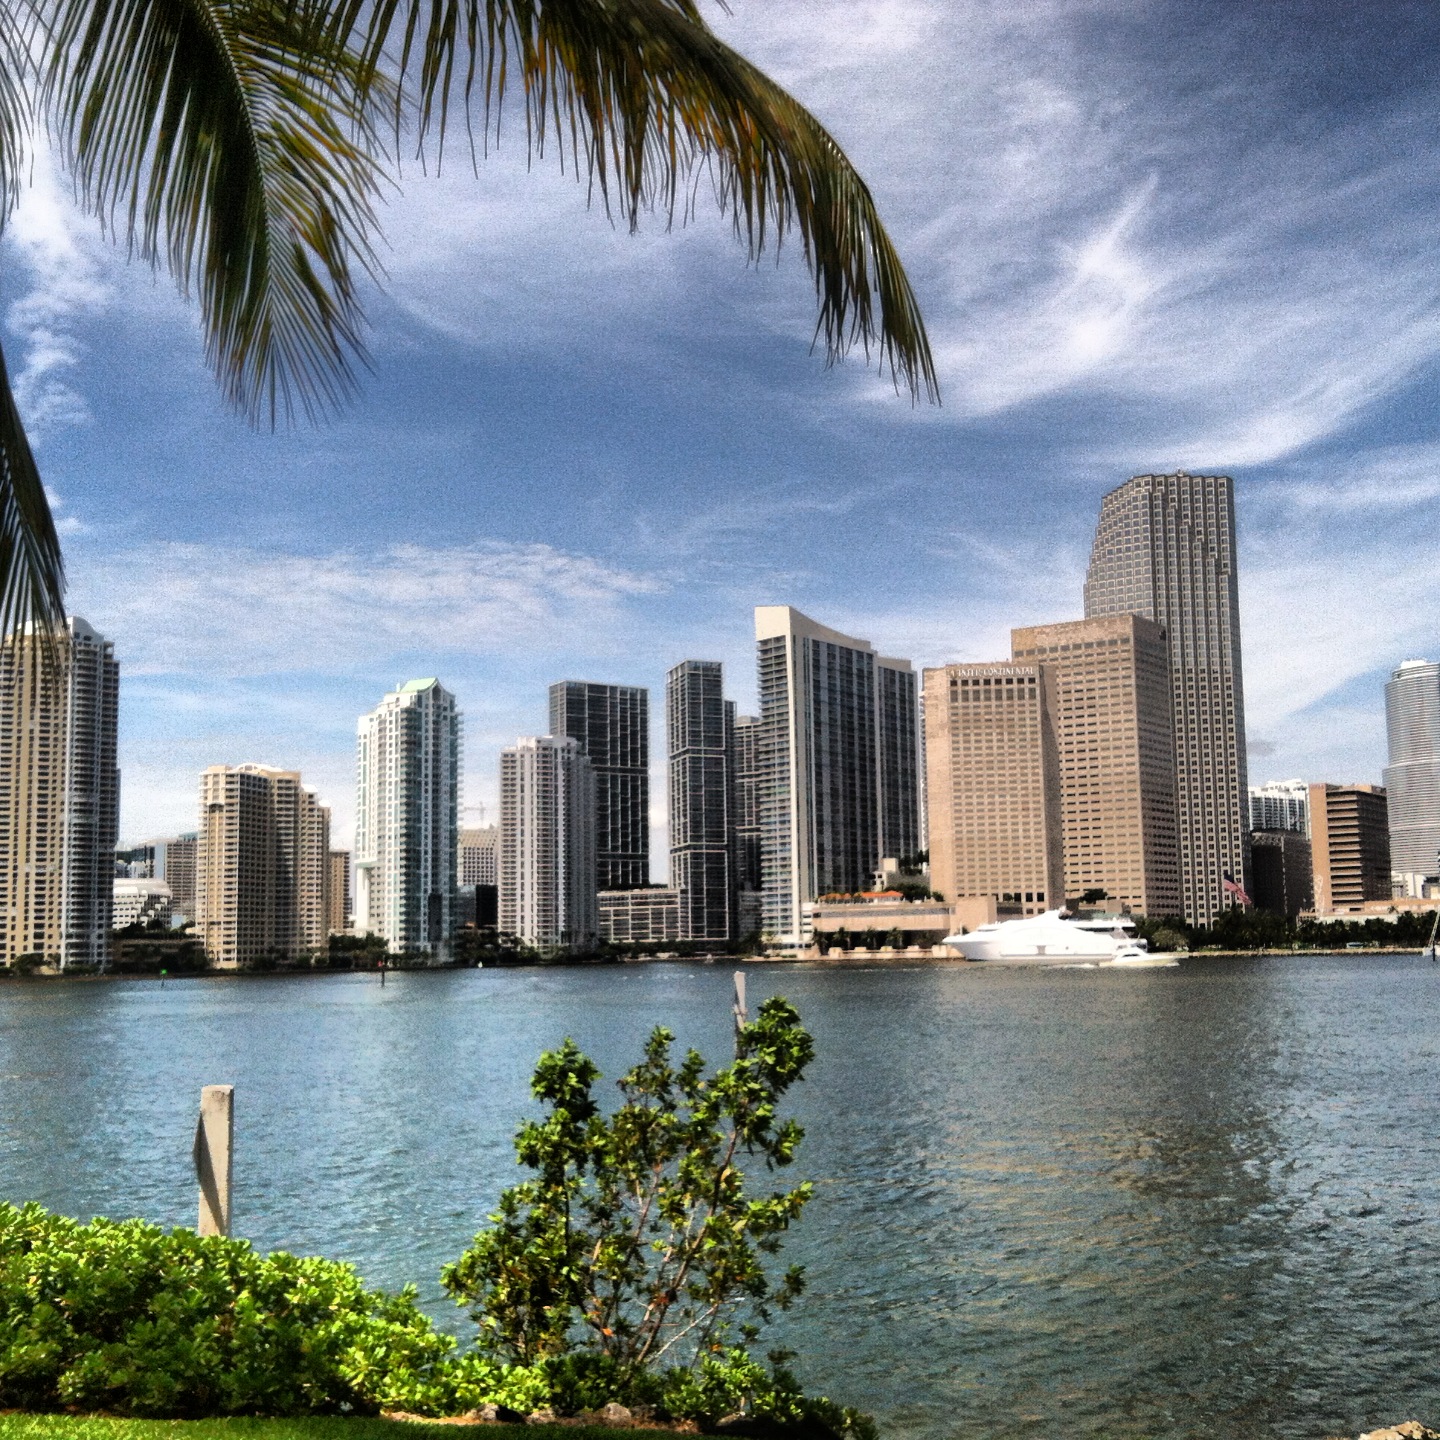 Biscayne Bay with tall city buildings overlooking in Miami.